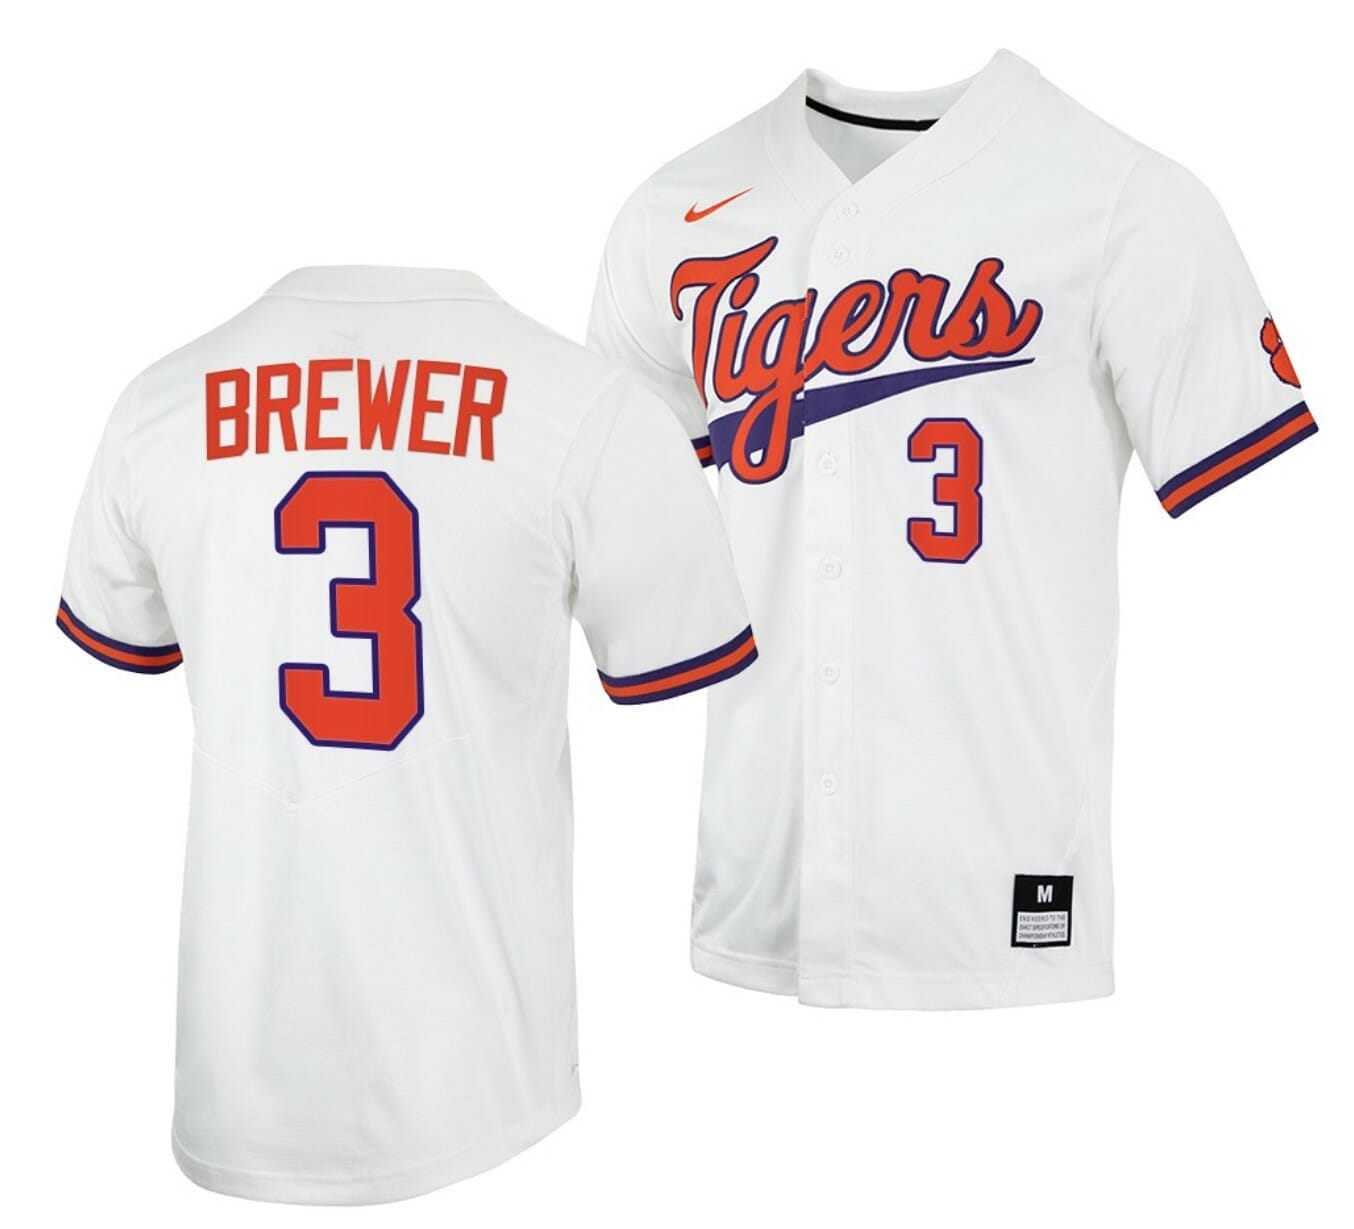 Clemson Tigers Jersey Dylan Brewer Baseball NCAA College Full-Button White #3